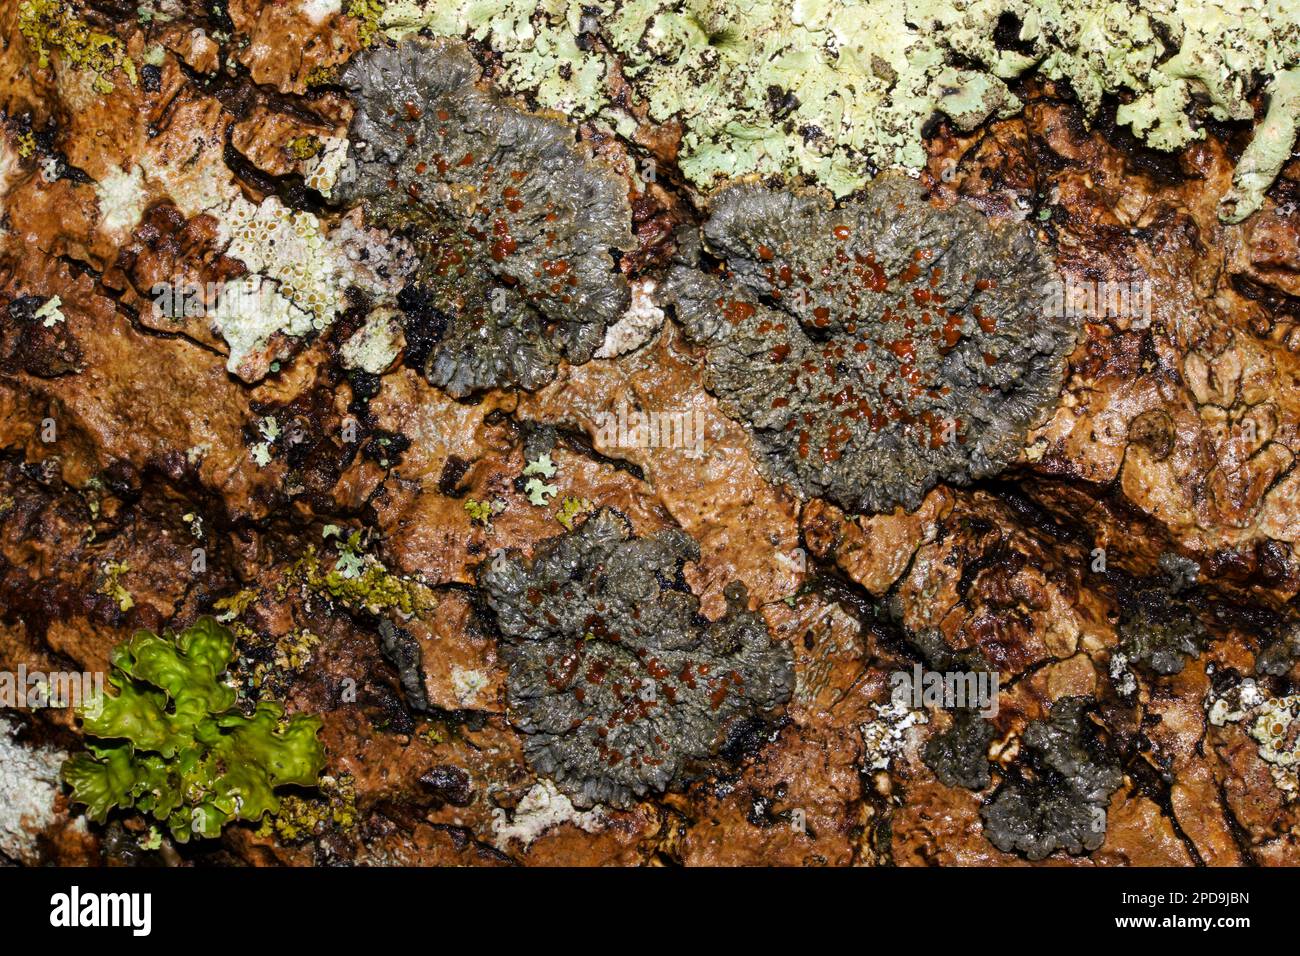 Degelia plumbea (blue felt lichen) mostly grows on trees in undisturbed woodlands. It is confined to maritime climates in Europe and North America. Stock Photo